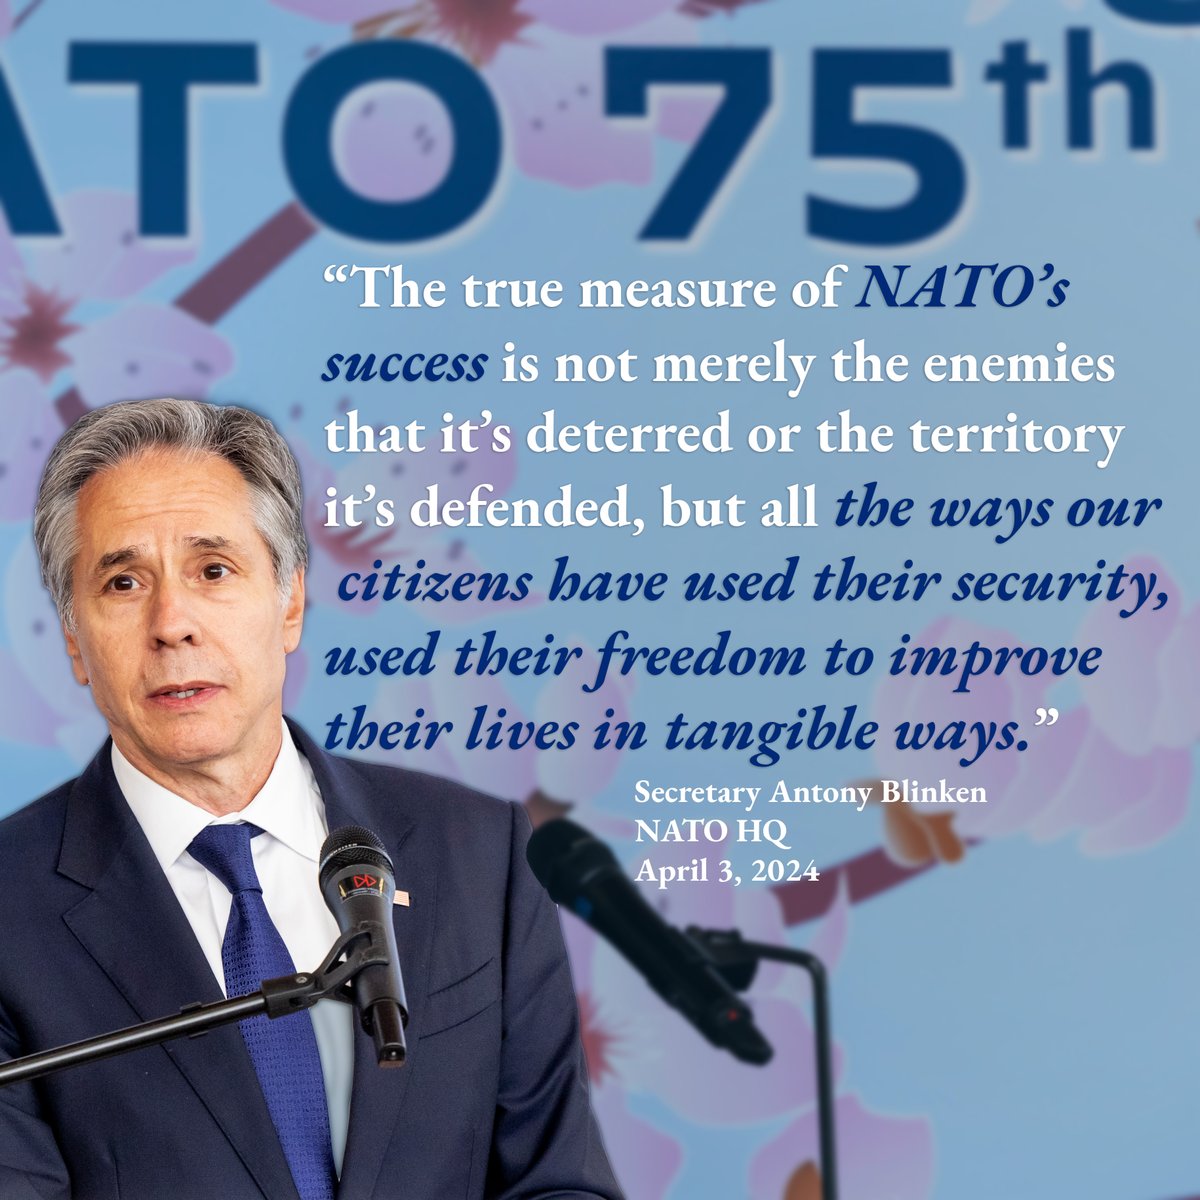 NATO is evolving. Our Alliance is changing. But even as it adapts, its purpose remains enduring. Ours is a defensive Alliance. #wearenato